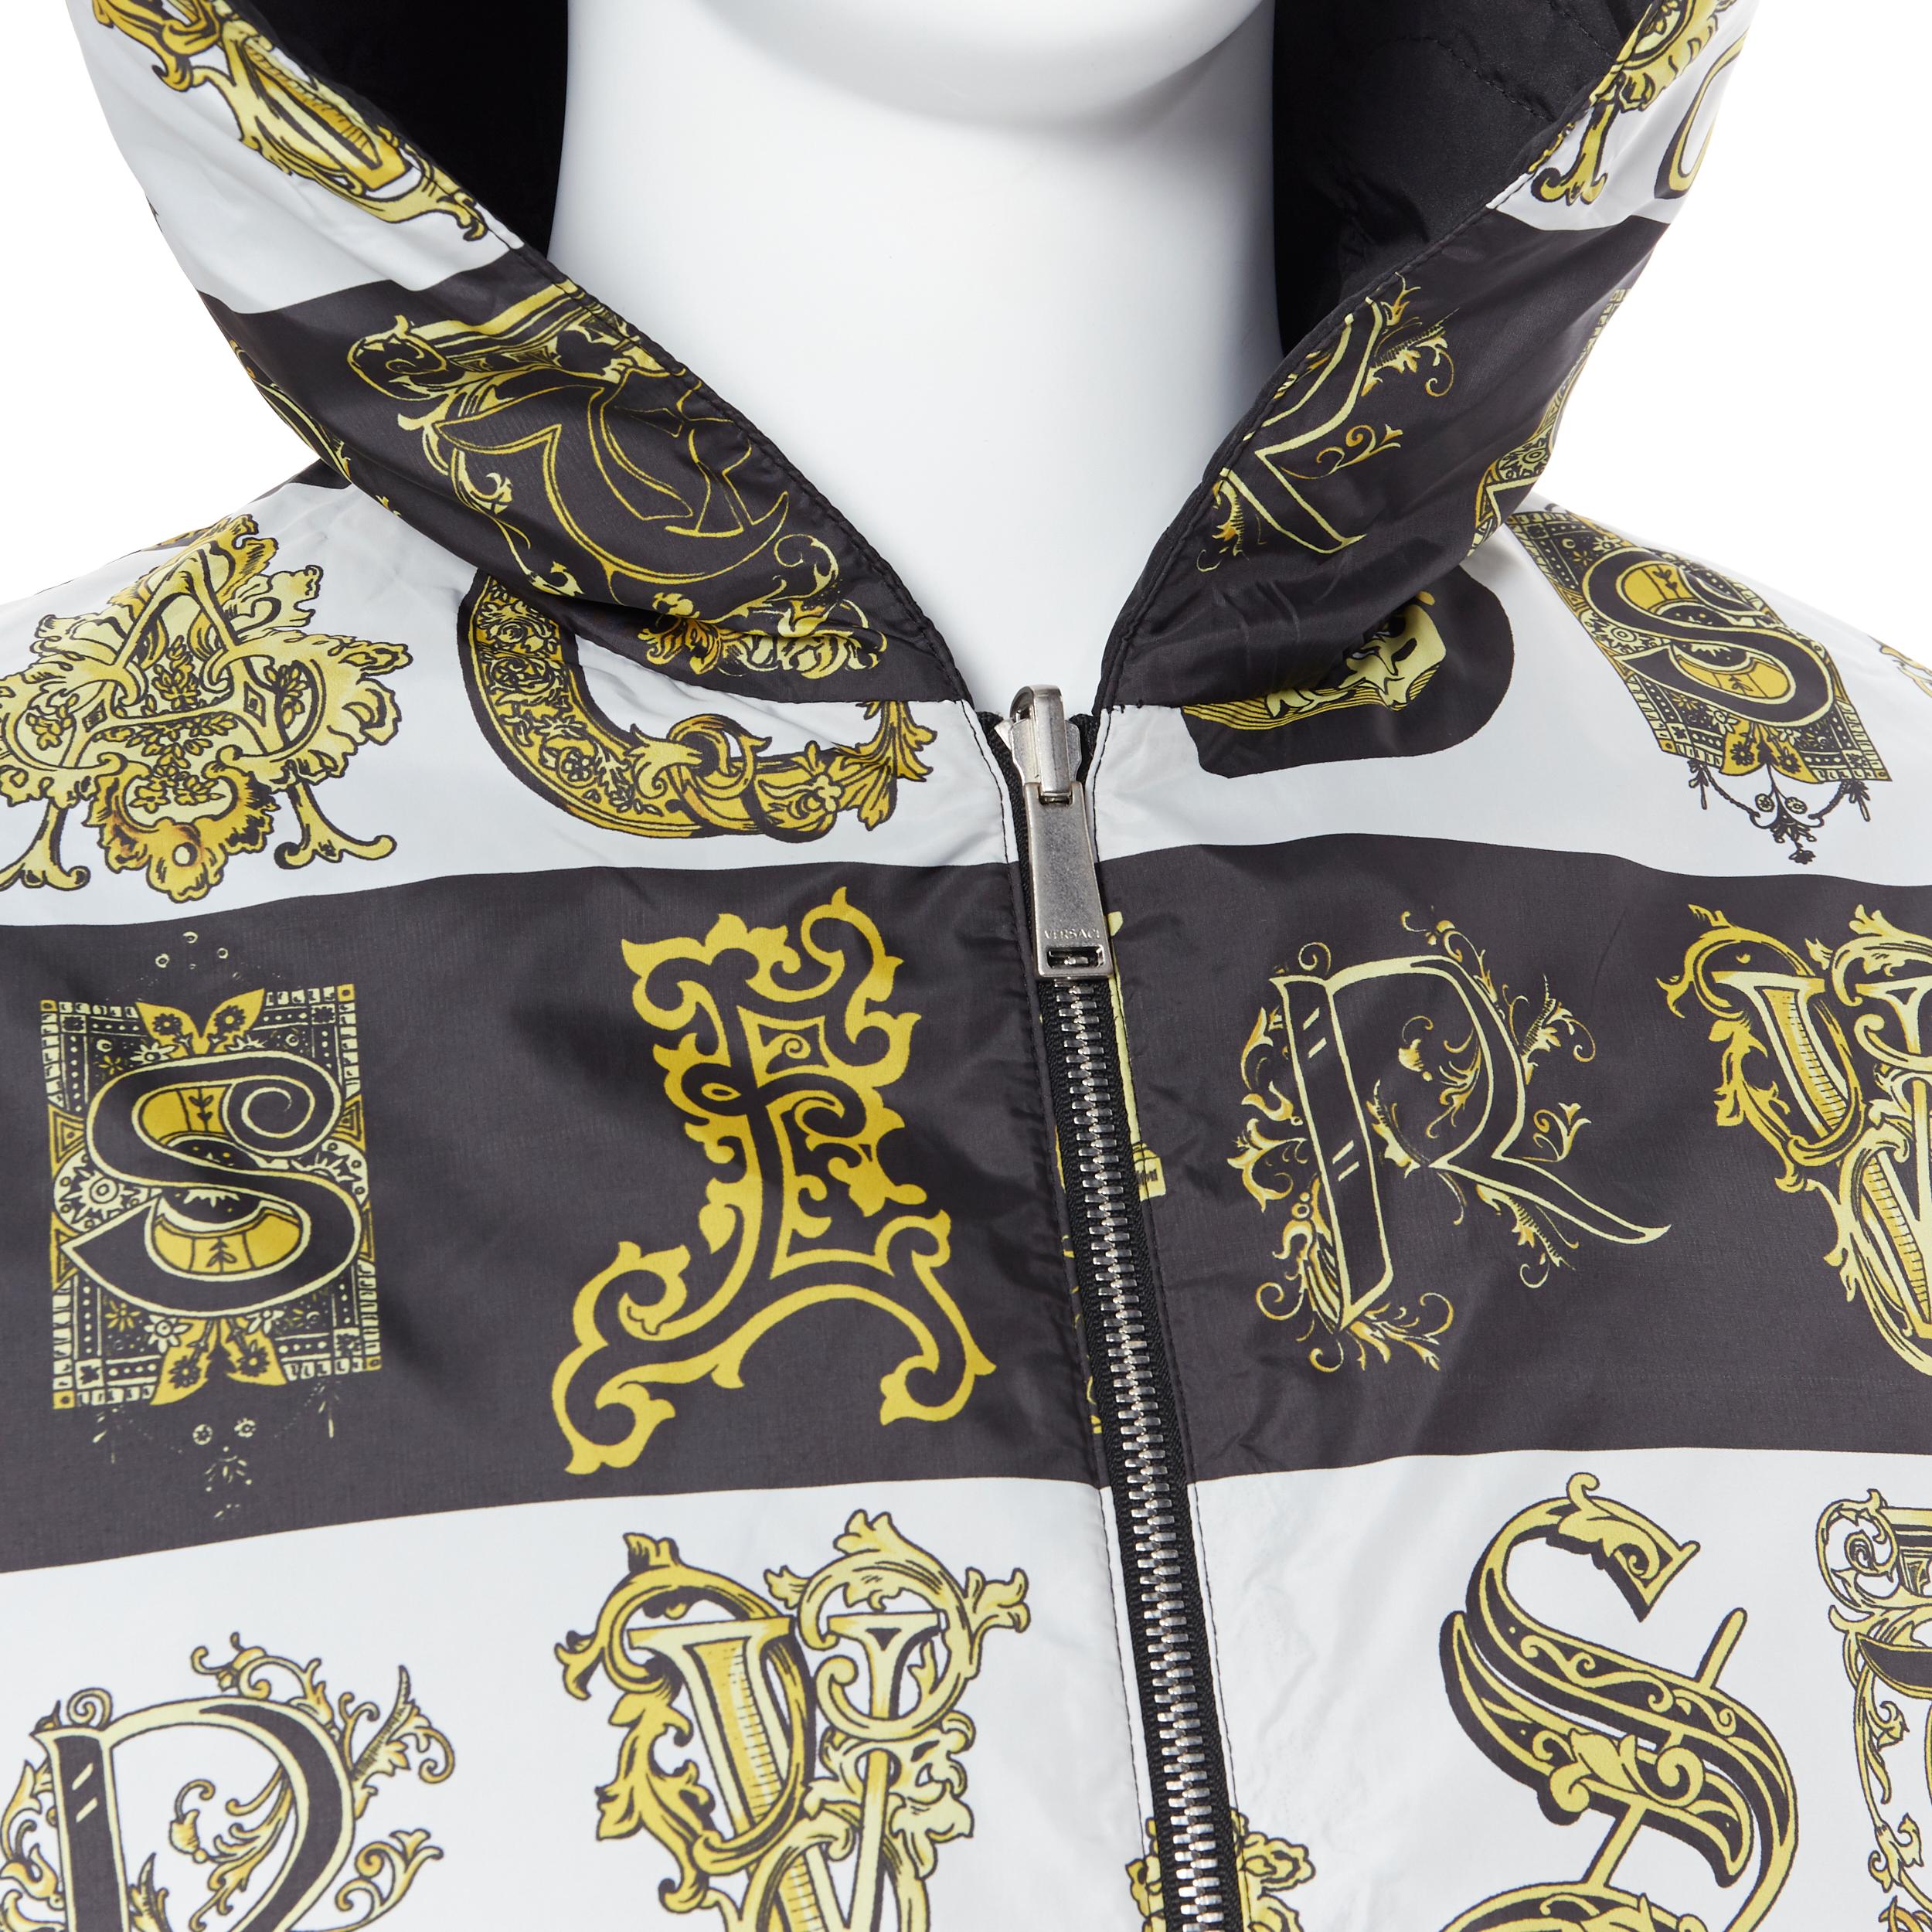 new VERSACE Reversible Baroque Alphabet gold black nylon quilted jacket IT58 4XL
Reference: TGAS/A05304
Brand: Versace
Designer: Donatella Versace
Collection: 2019 
Material: Nylon
Color: Multicolour
Pattern: Abstract
Closure: Zip
Extra Detail: 100%